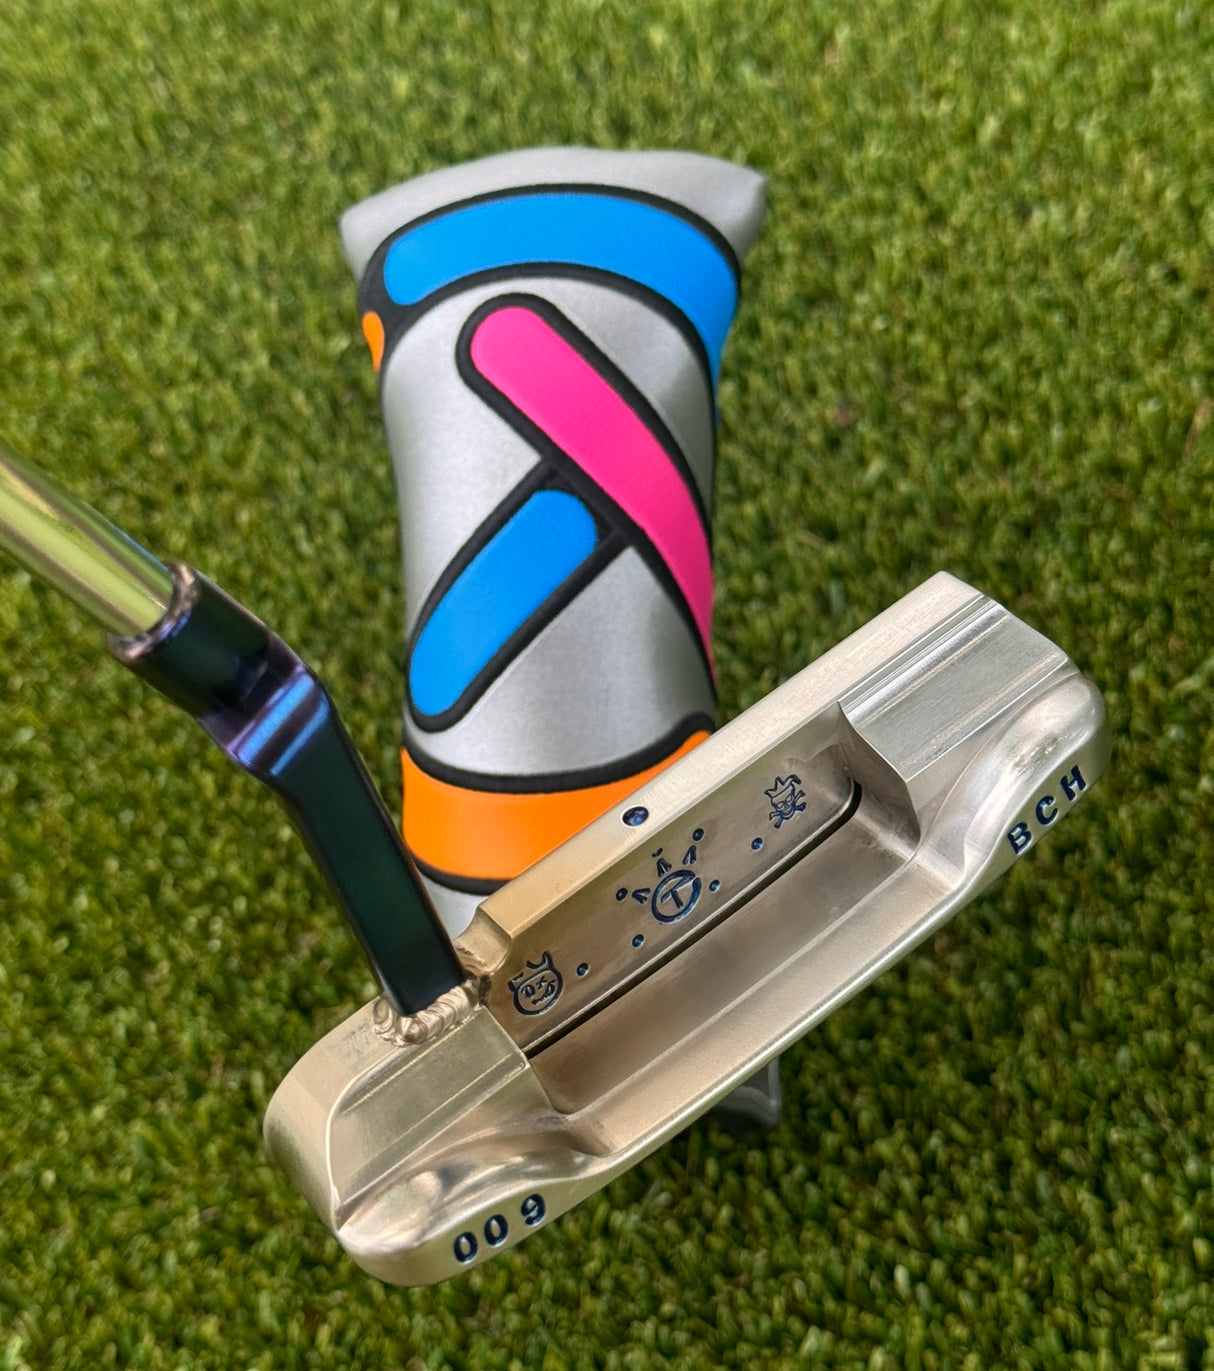 Scotty Cameron 009M Beached Welded Two Tone Hot Head Harry, Jesters Circle T Putter